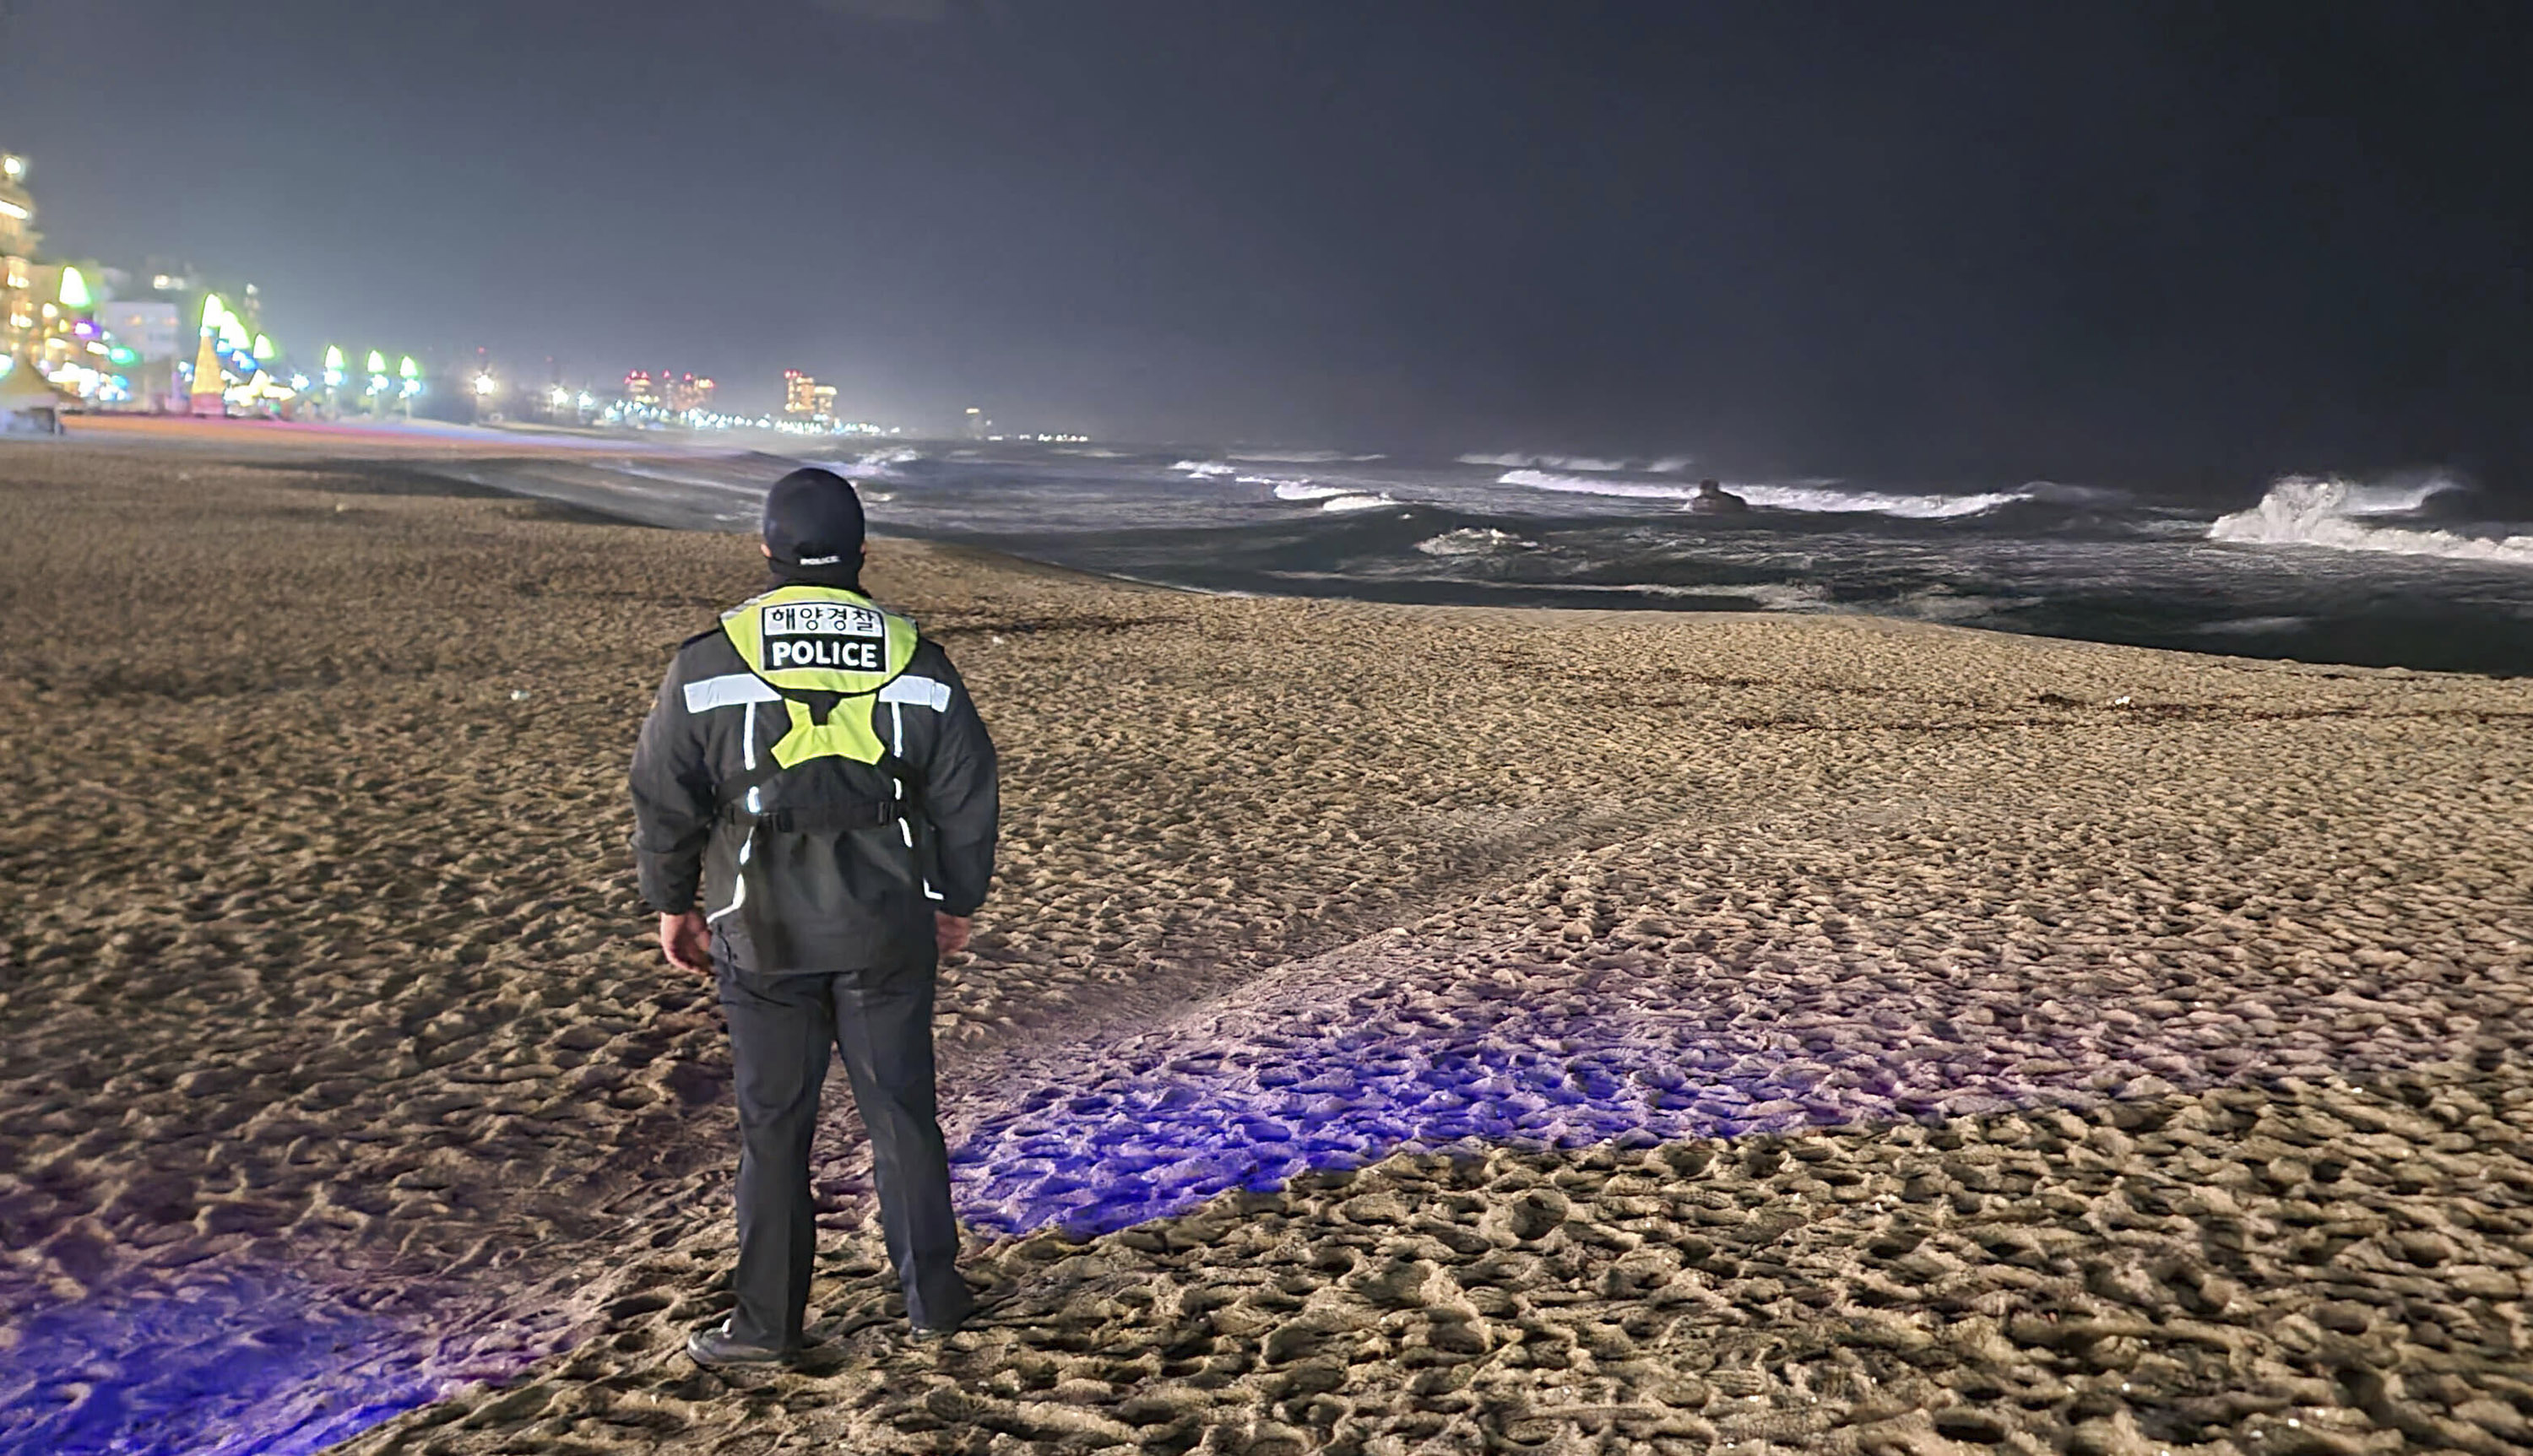 A member of the coast guard patrols a beach in Gangneung, South Korea, monitoring for possible sea level changes, on Monday, January 1.